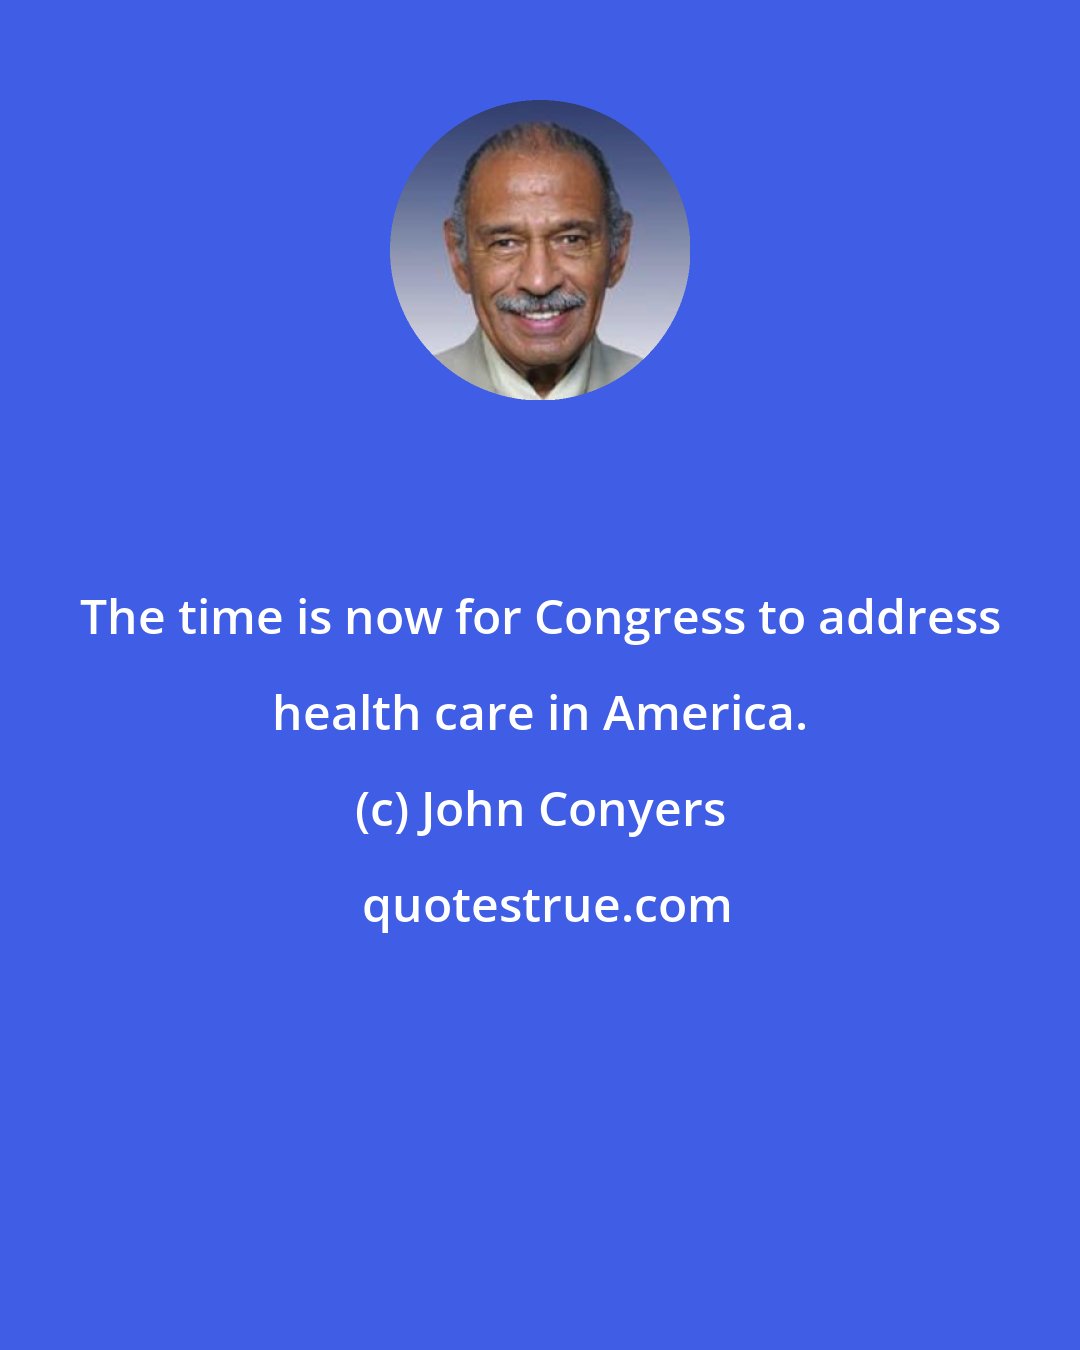 John Conyers: The time is now for Congress to address health care in America.